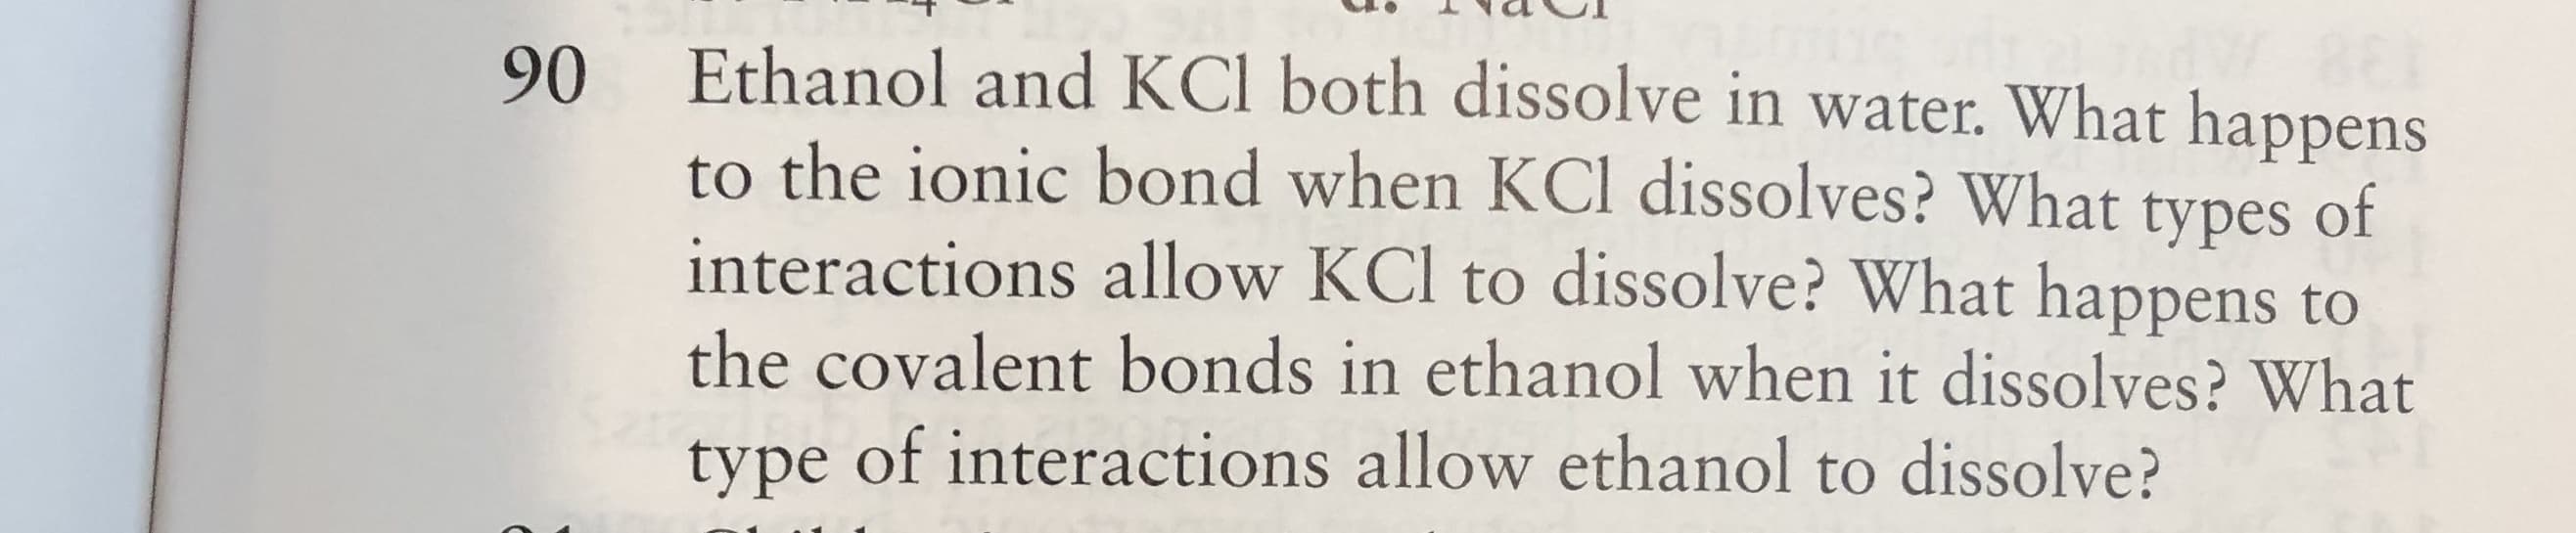 Ethanol and KCl both dissolve in water. What happens
90
to the ionic bond when KCl dissolves? What types of
interactions allow KCl to dissolve? What happens to
the covalent bonds in ethanol when it dissolves? What
type of interactions allow ethanol to dissolve?
